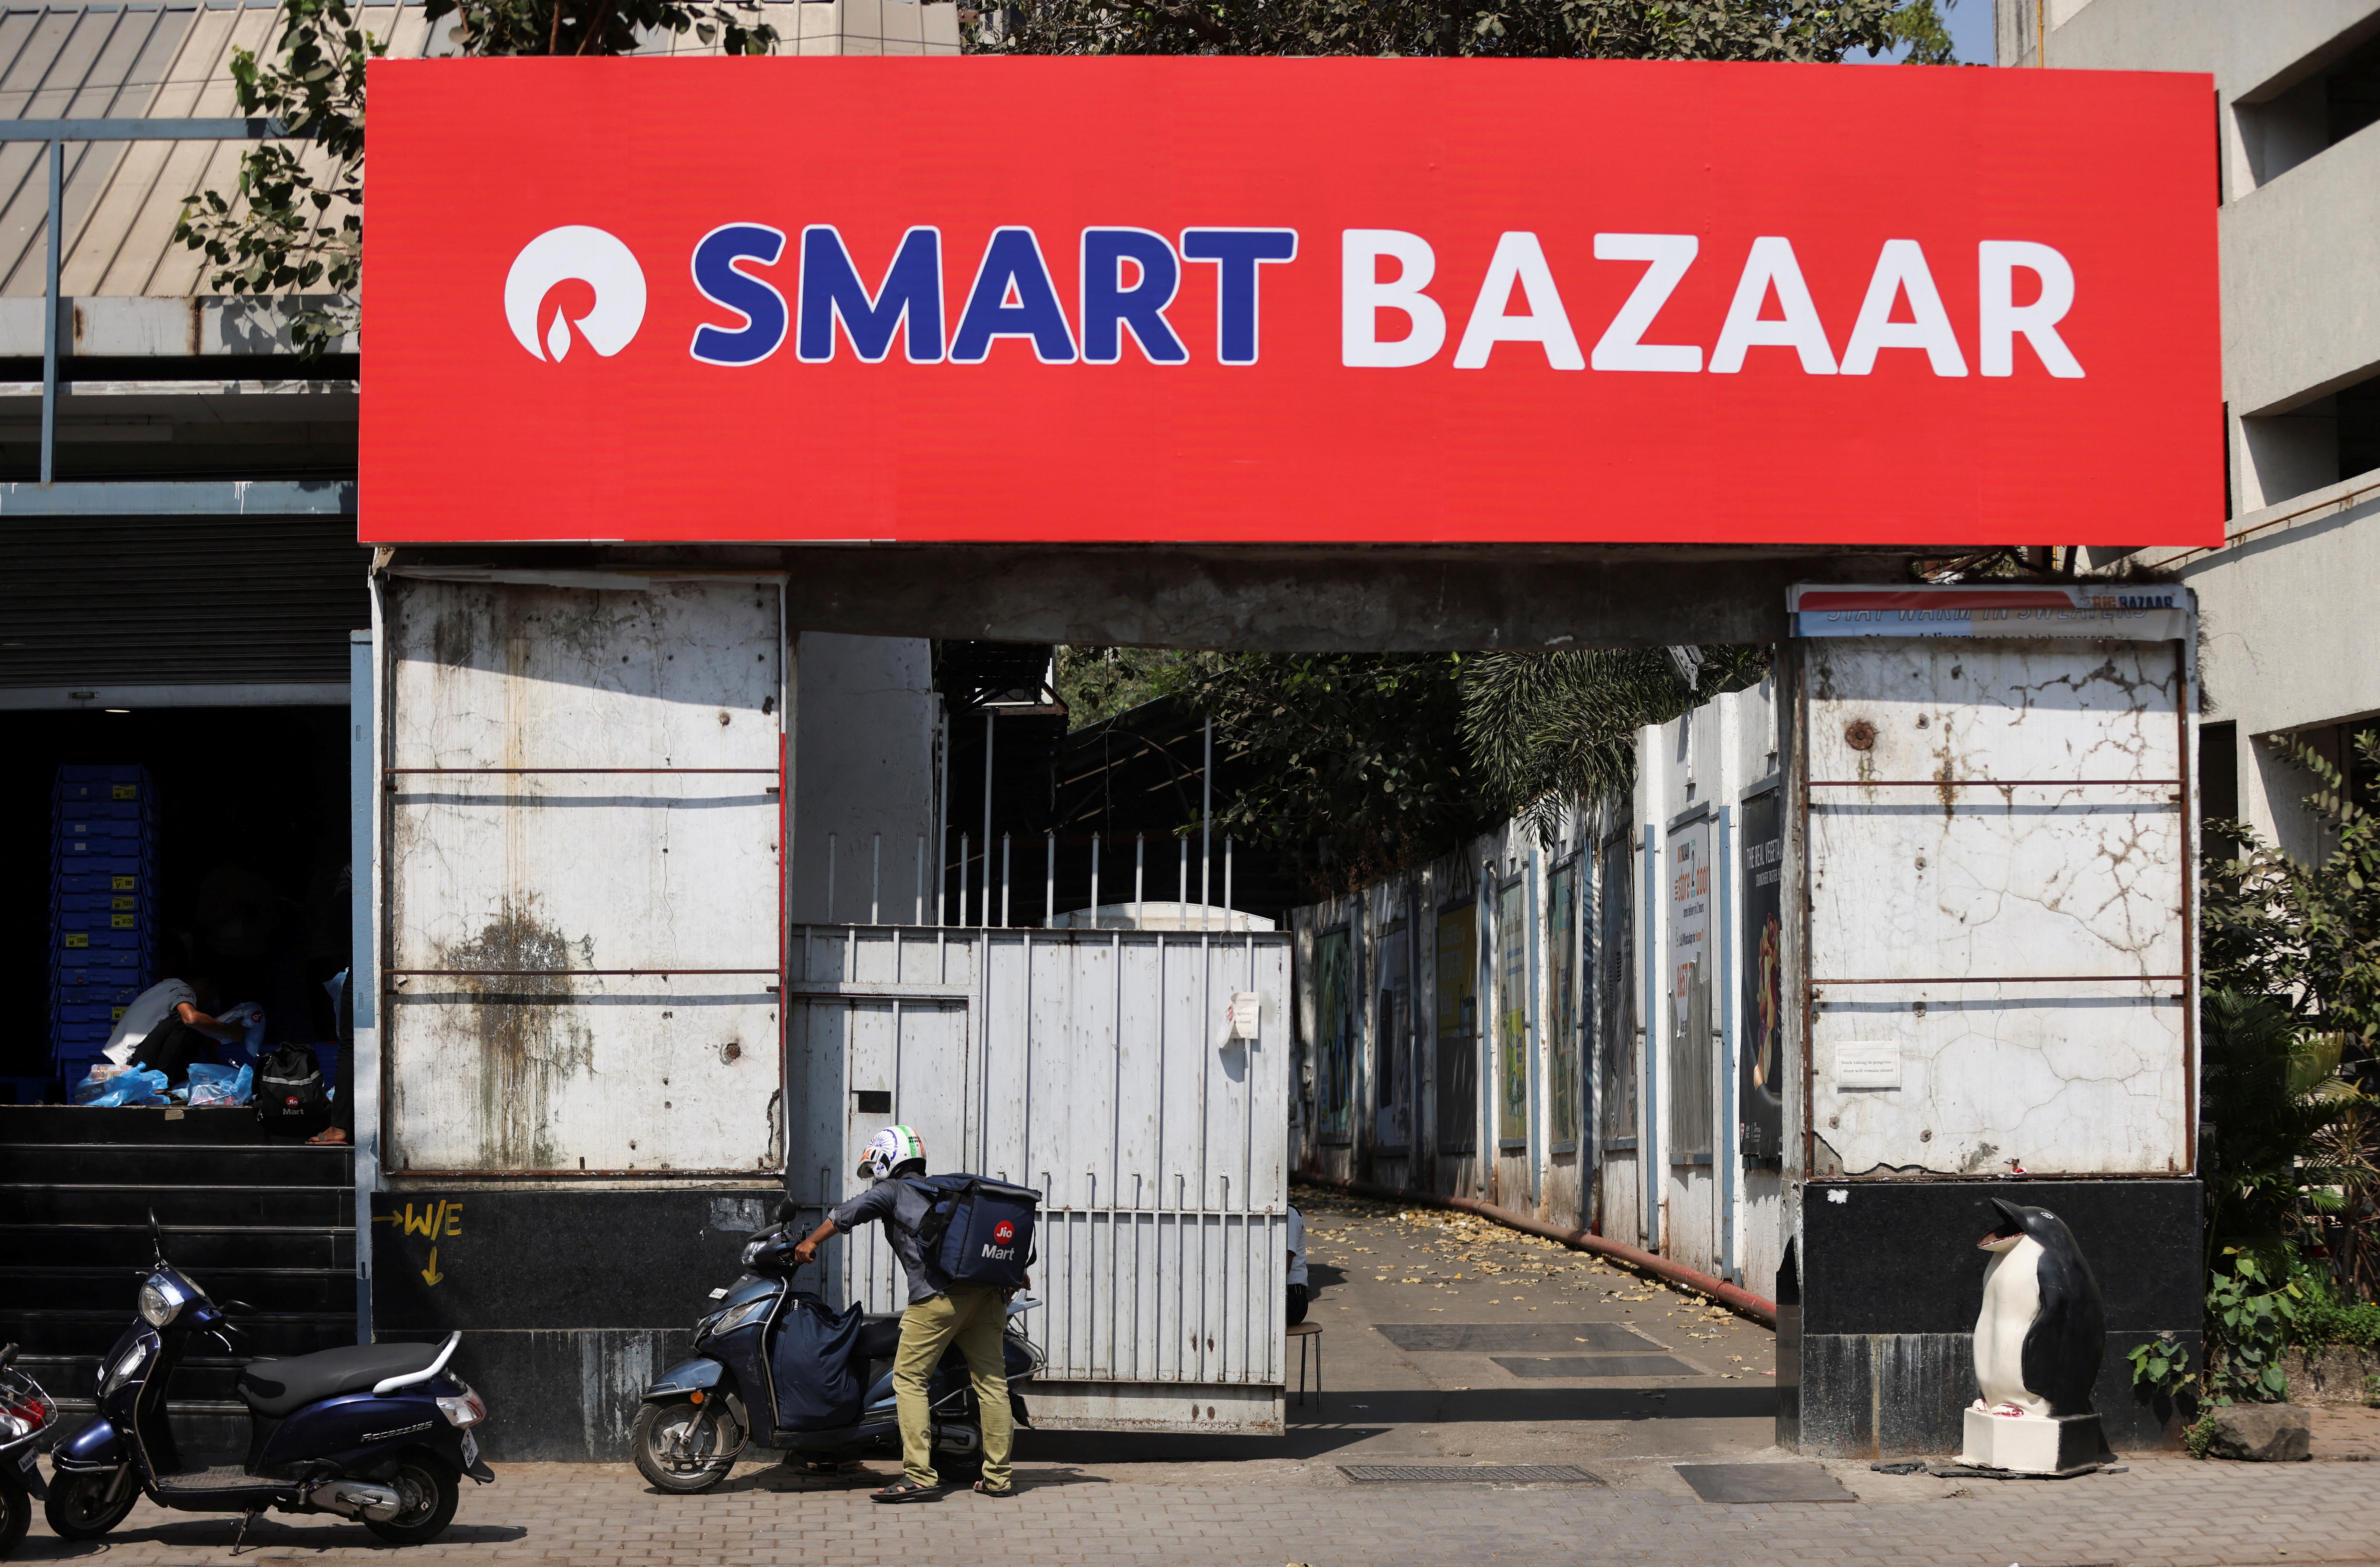 A delivery boy parks his scooter outside a Reliance Smart Bazaar retail store, which was previously Future Retail's Big Bazaar outlet in Mumbai